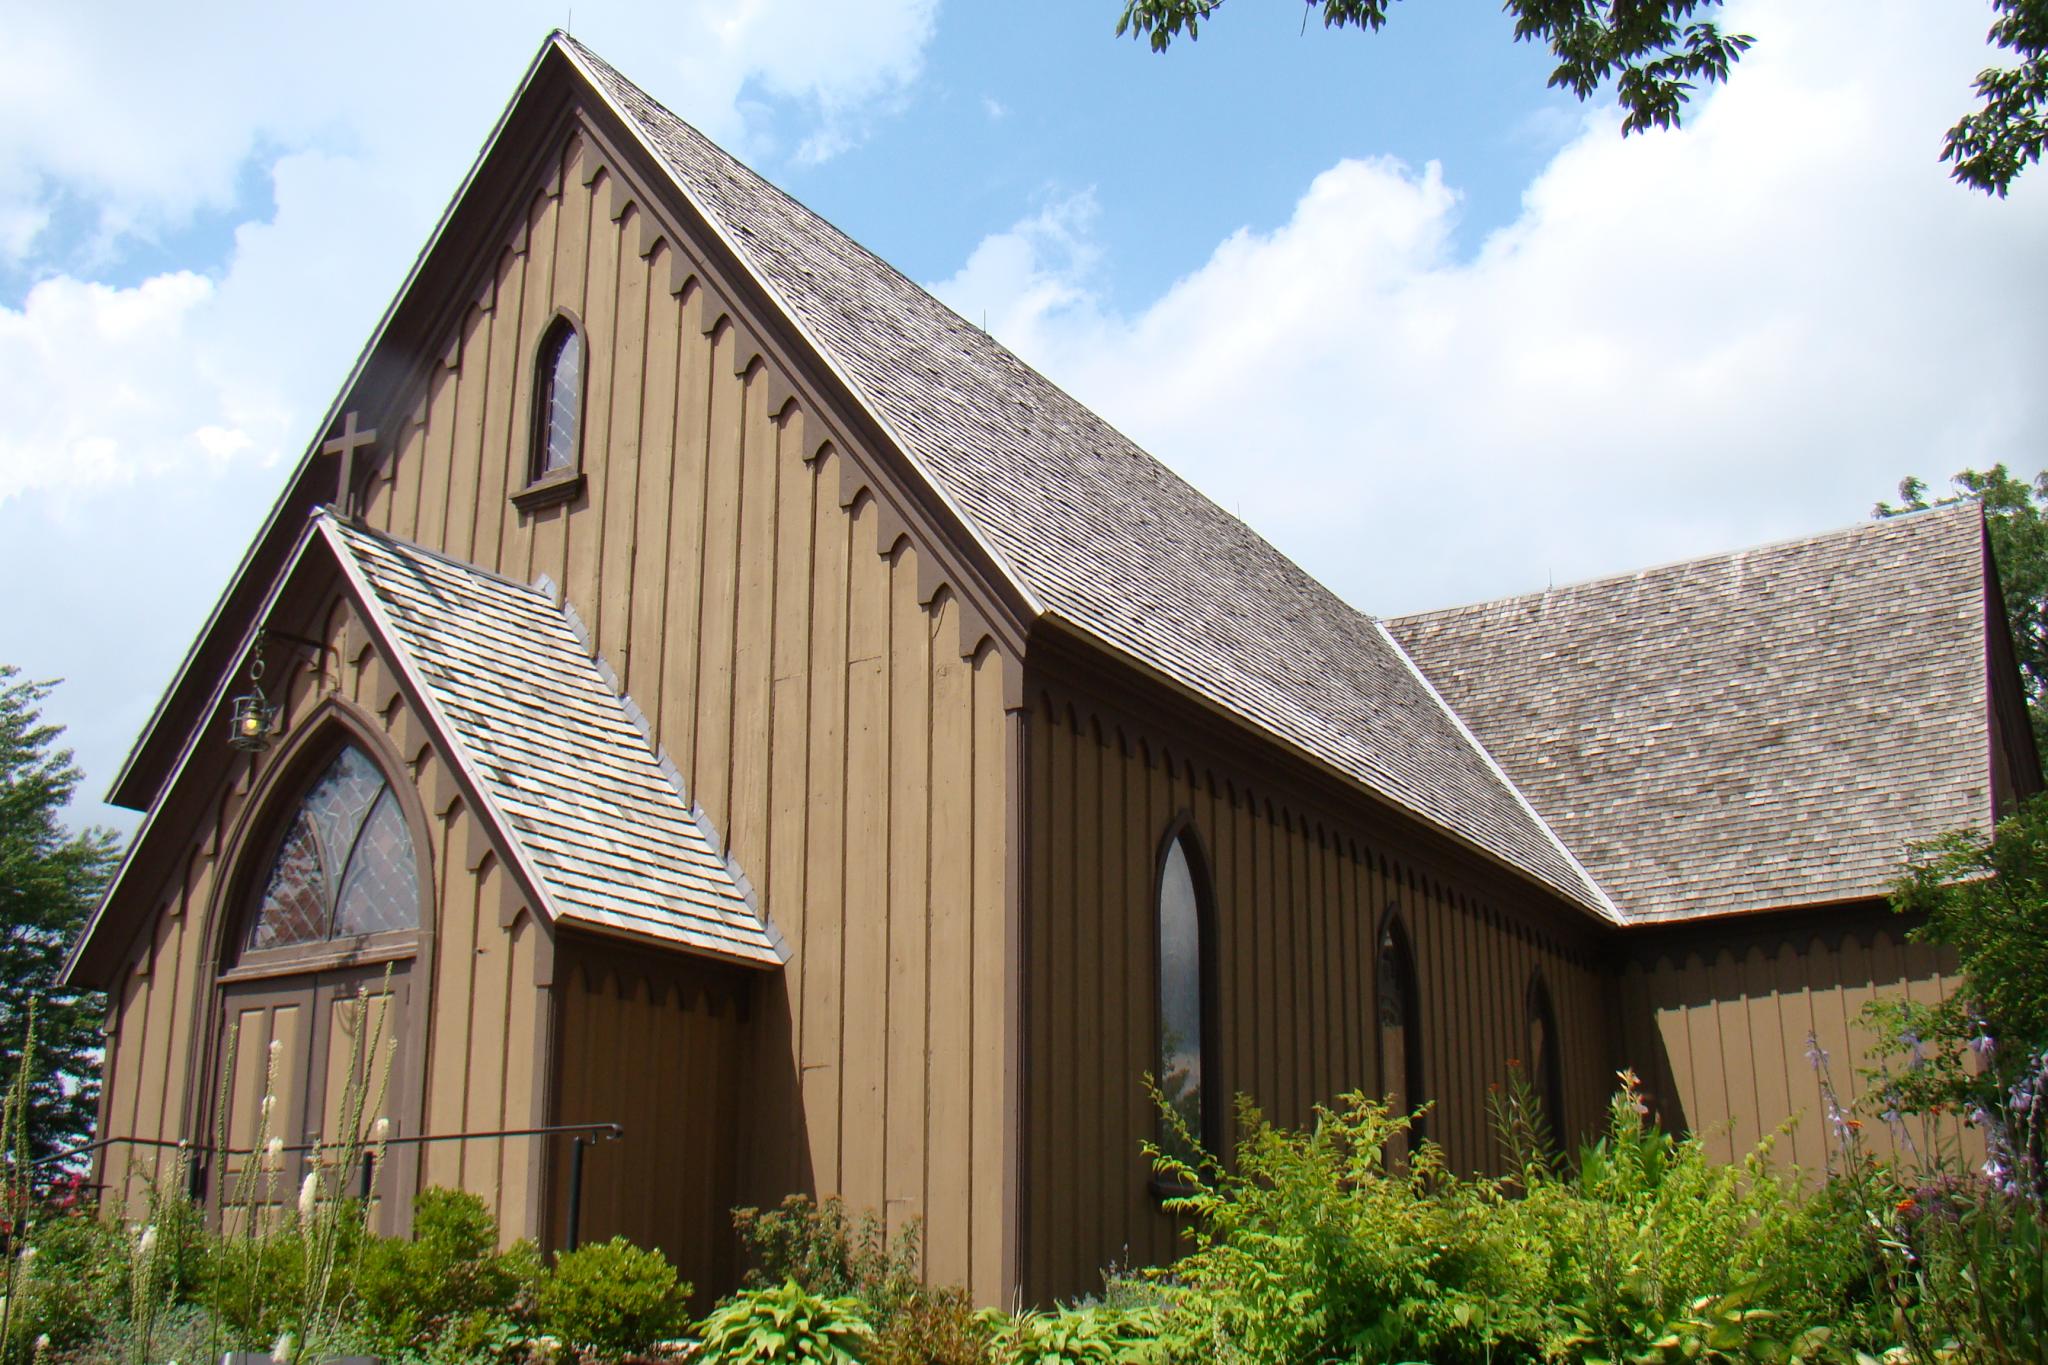 Steeply pitched roof, Century Memorial Chapel